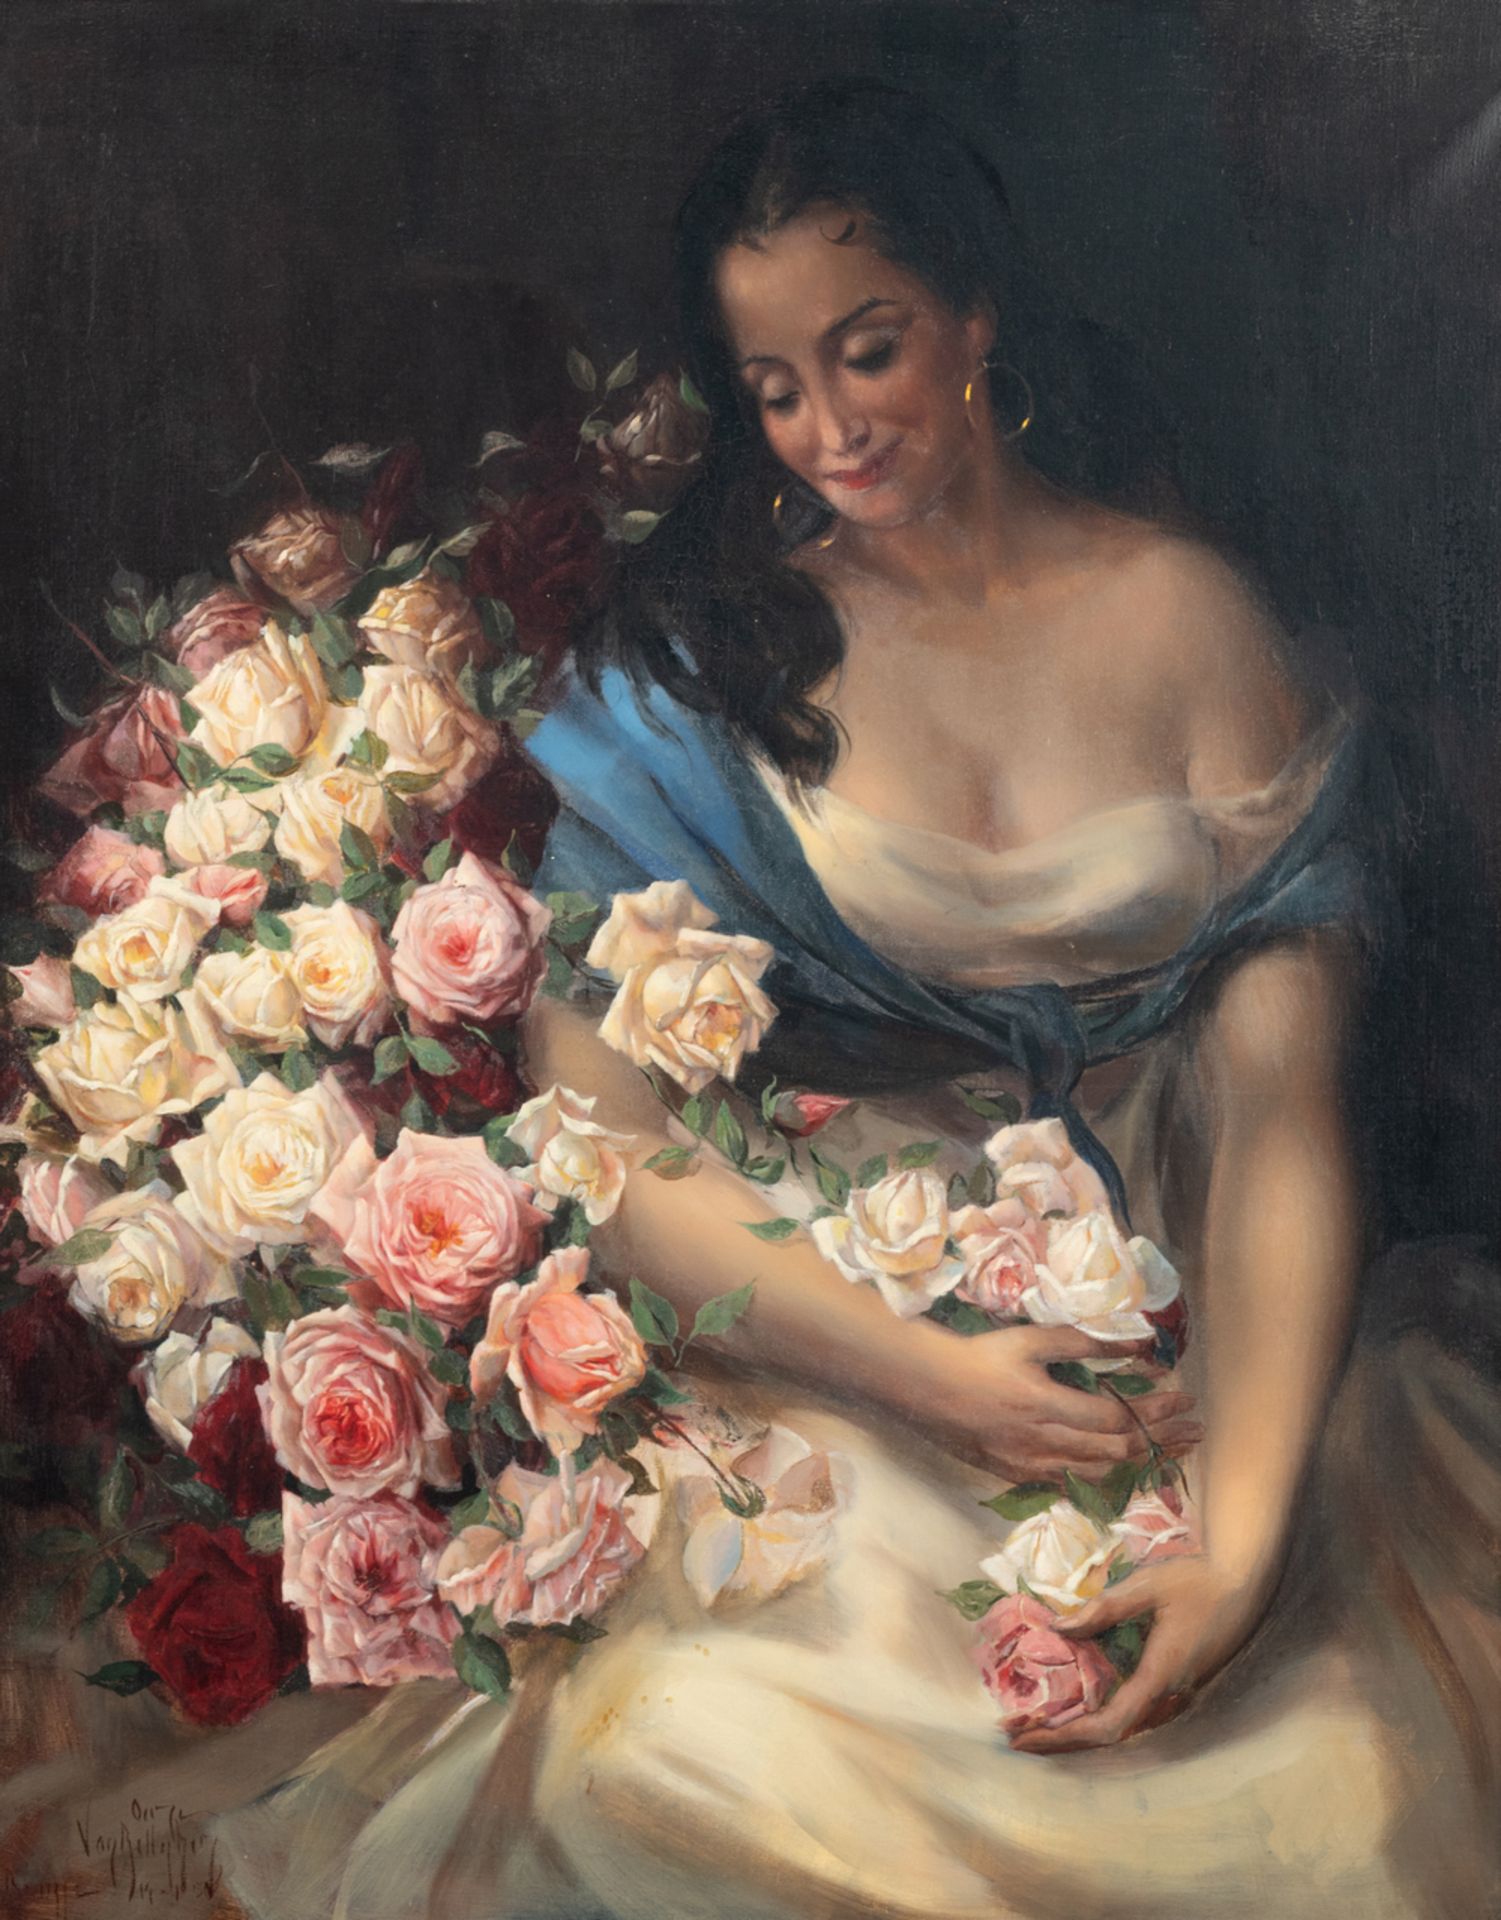 Van Belleghem A., a Gypsy girl surrounded by roses, oil on canvas, 80 x 99 cm